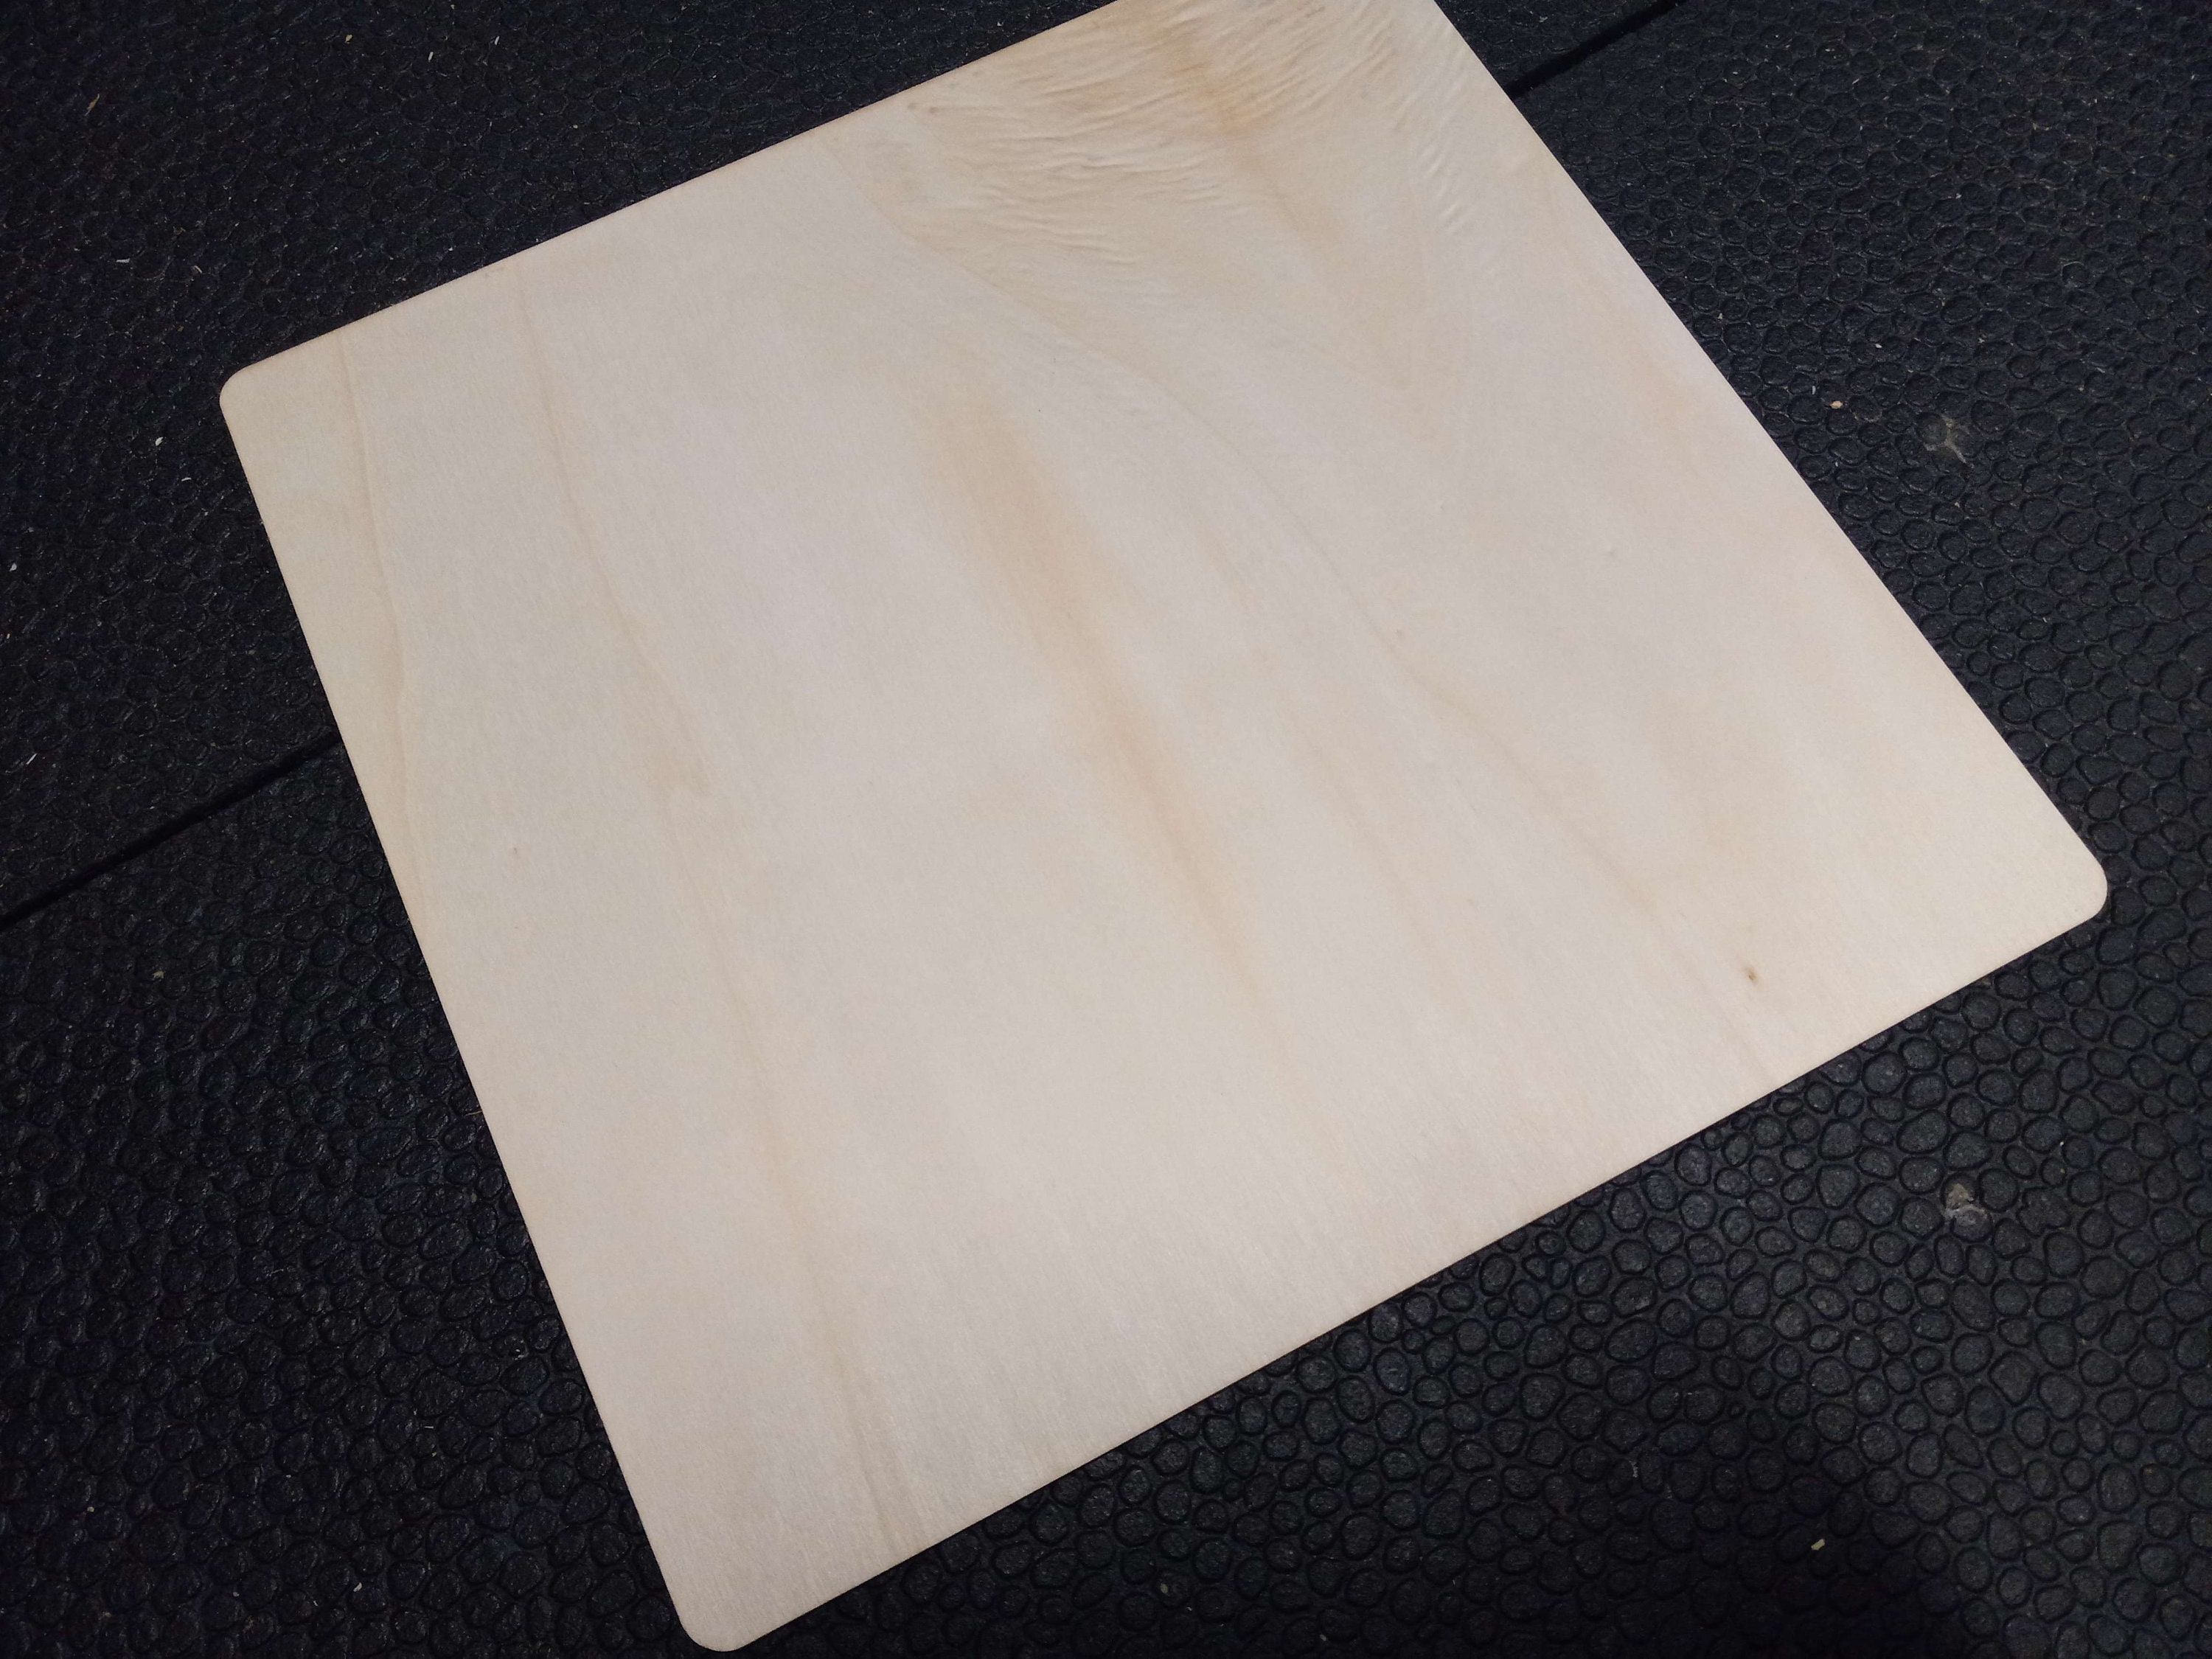 Basswood Sheets 12X8X1/16 (8 Pack) - Thin Plywood Sheets for Crafts - DIY  Wood